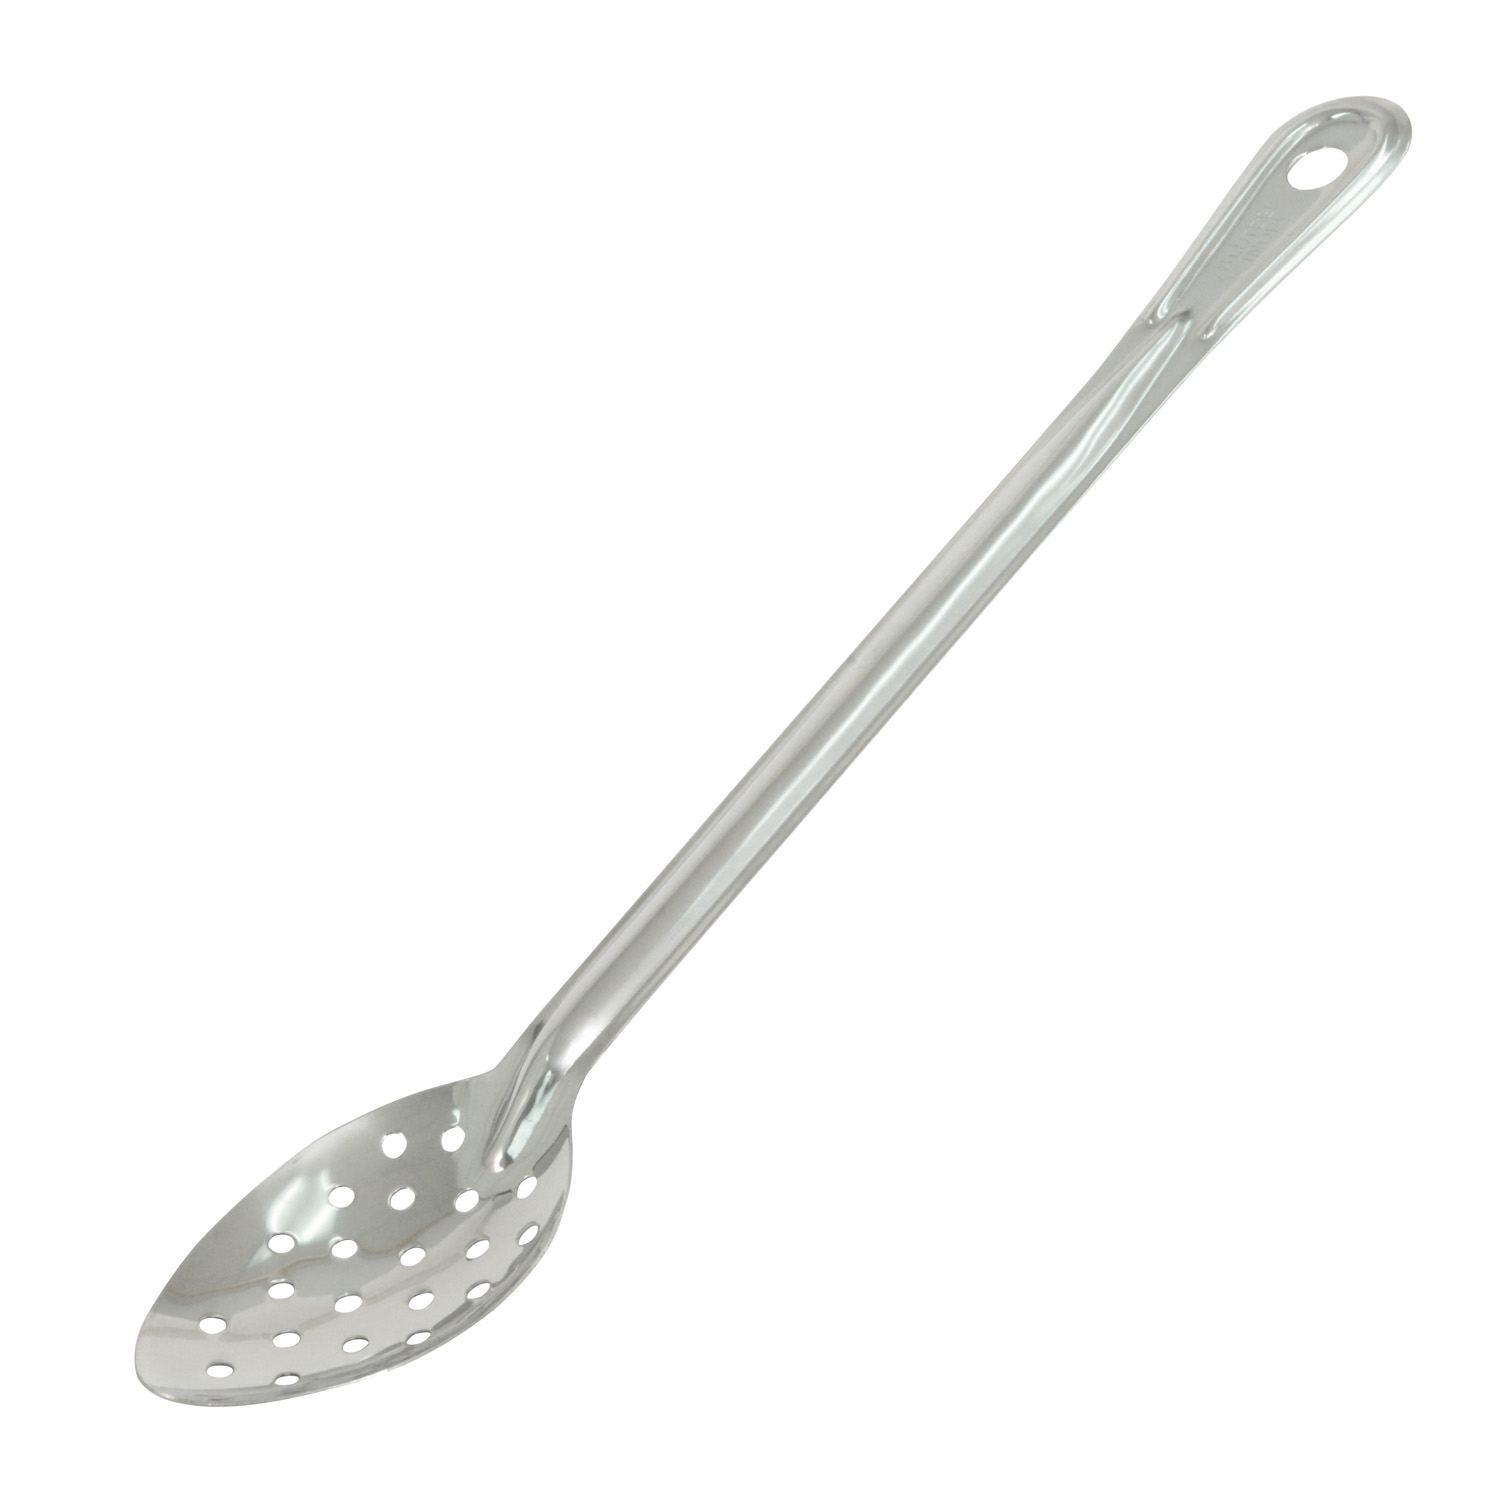 CAC China SBSP-21 Perforated Stainless Steel Basting Spoon 1.5mm 21"